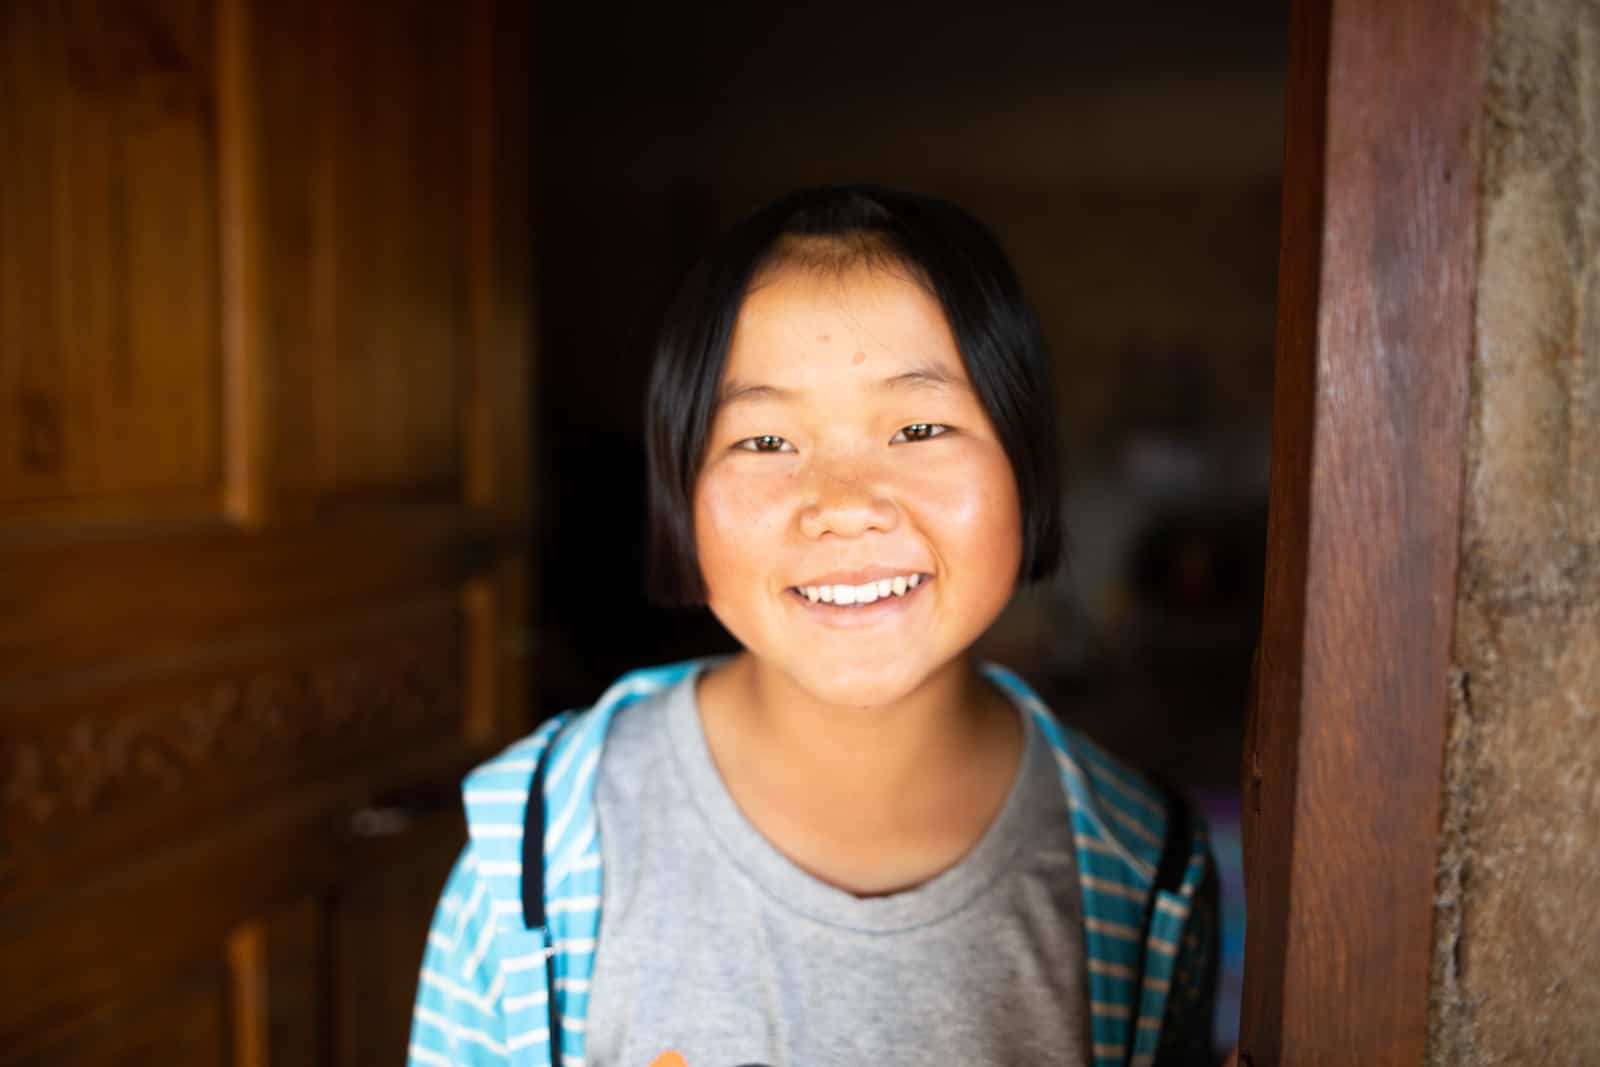 A girl in a grey shirt stands in the doorway of a home, smiling.